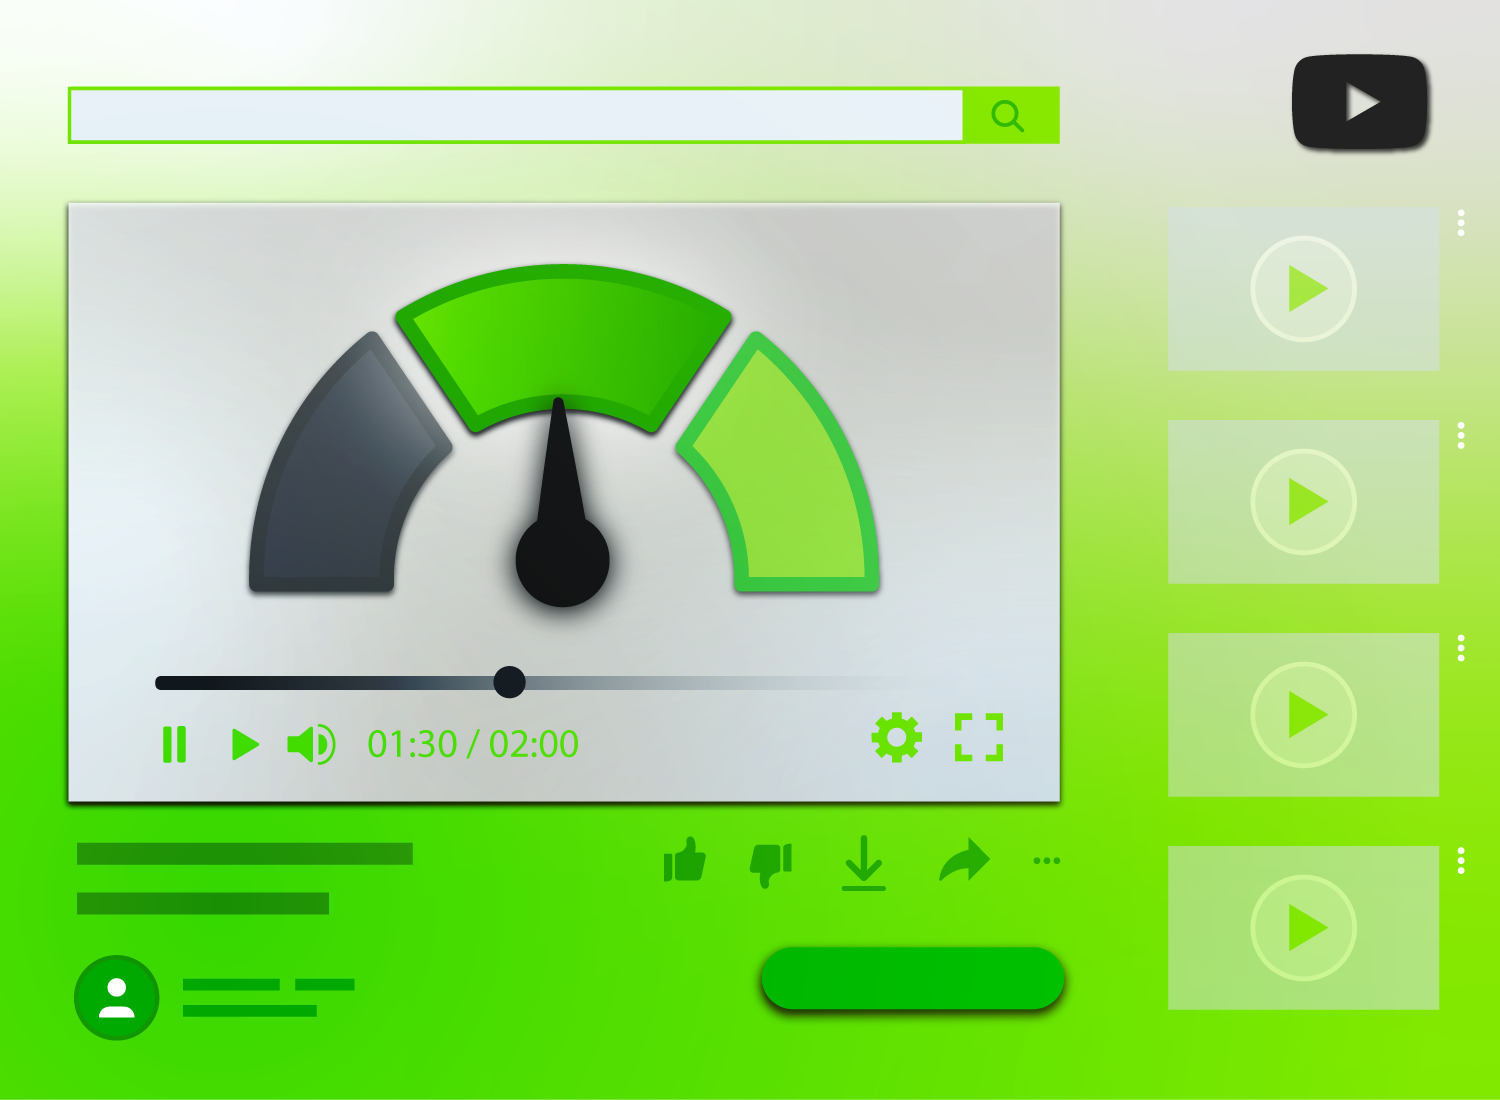 A video player interface is displayed with a green theme. In the center of the screen, a progress gauge is shown, where the needle points towards the green section, indicating progress. Below the gauge is a video control bar showing that the video is at 1:30 out of a total of 2:00 minutes. The interface includes standard video controls such as play/pause, volume, and settings icons. On the right side, there are four video thumbnails indicating related or suggested videos. The background and other interface elements are in various shades of green.